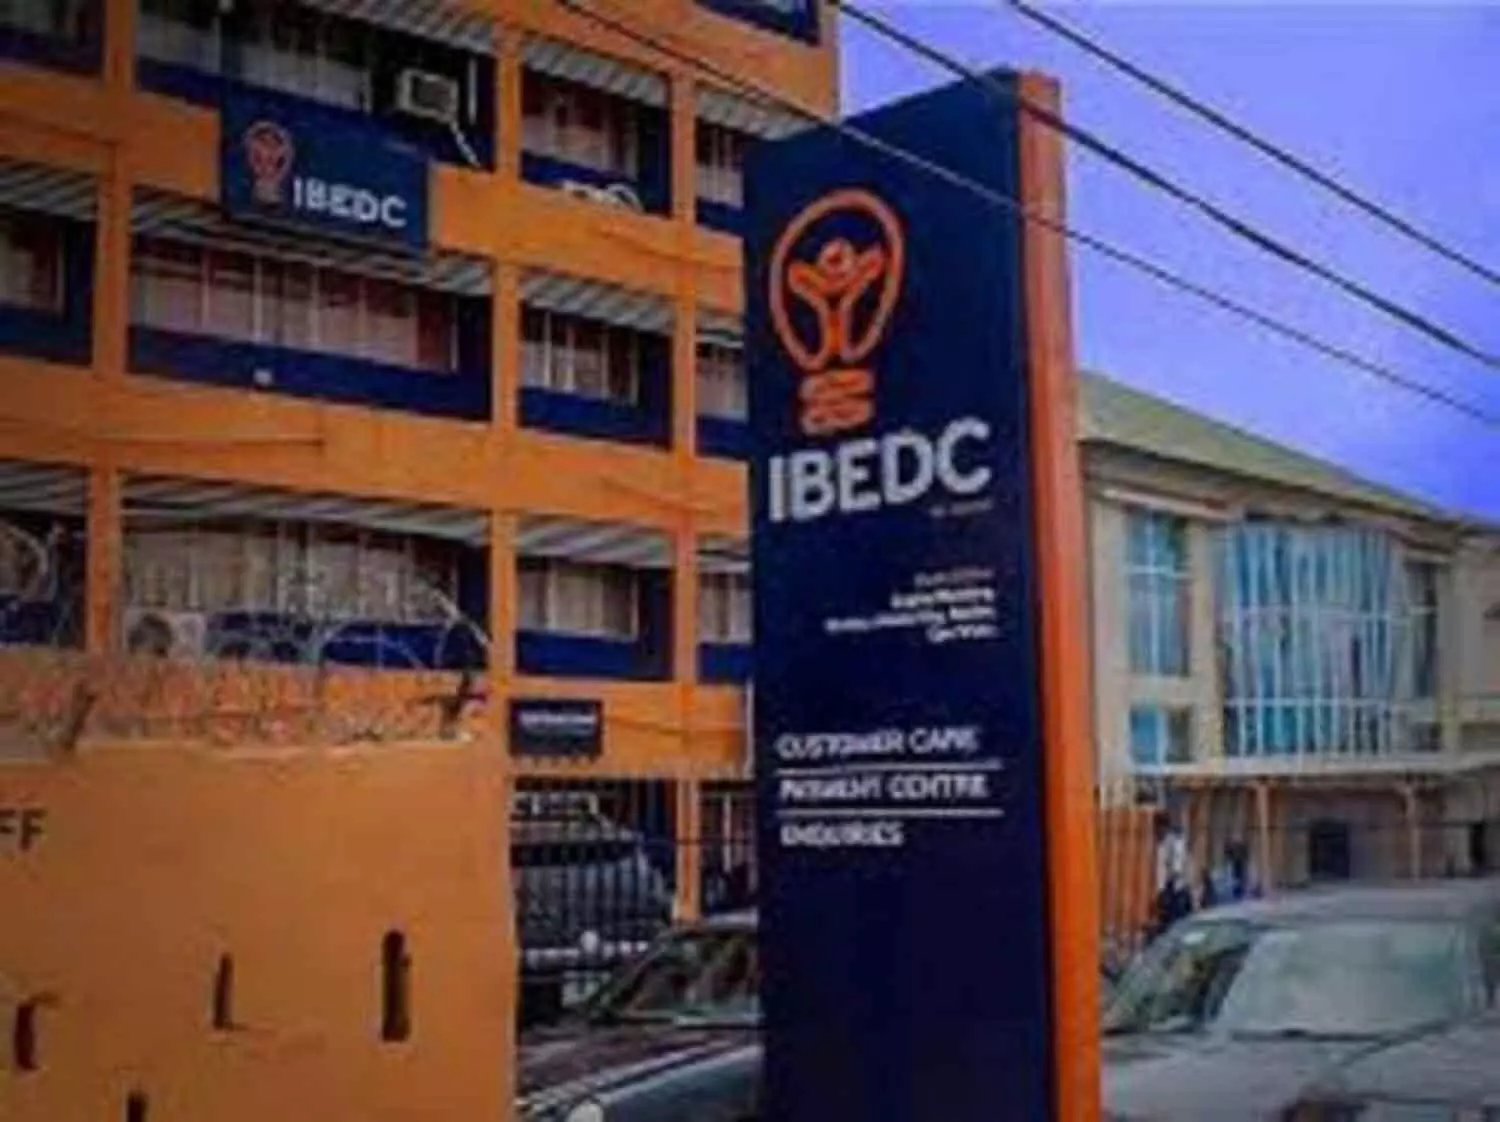 Why there’s poor power supply in our franchise area – IBEDC